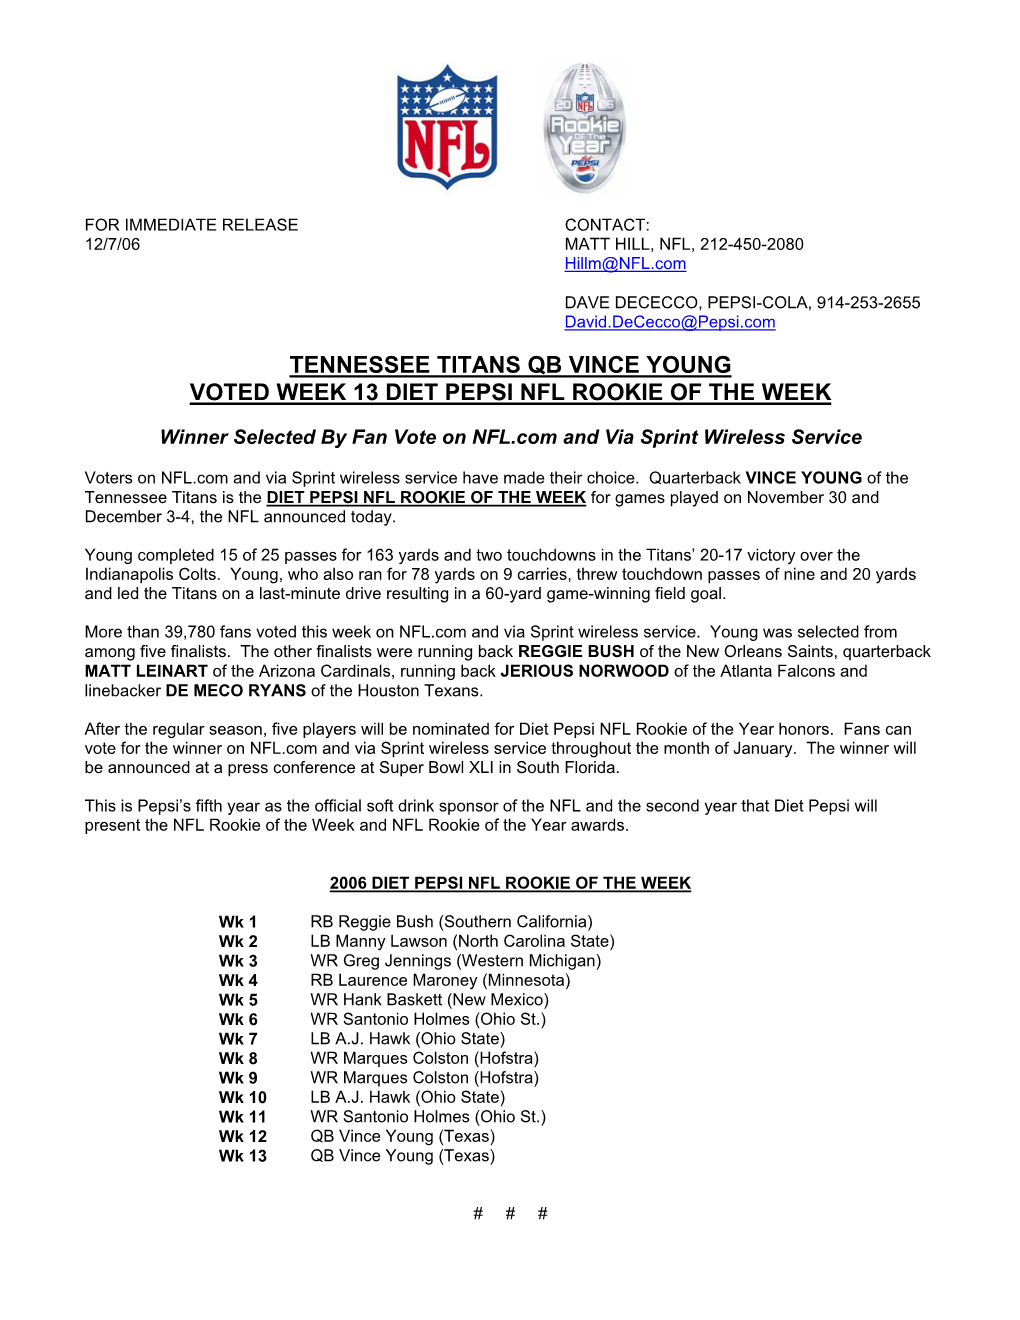 Tennessee Titans Qb Vince Young Voted Week 13 Diet Pepsi Nfl Rookie of the Week